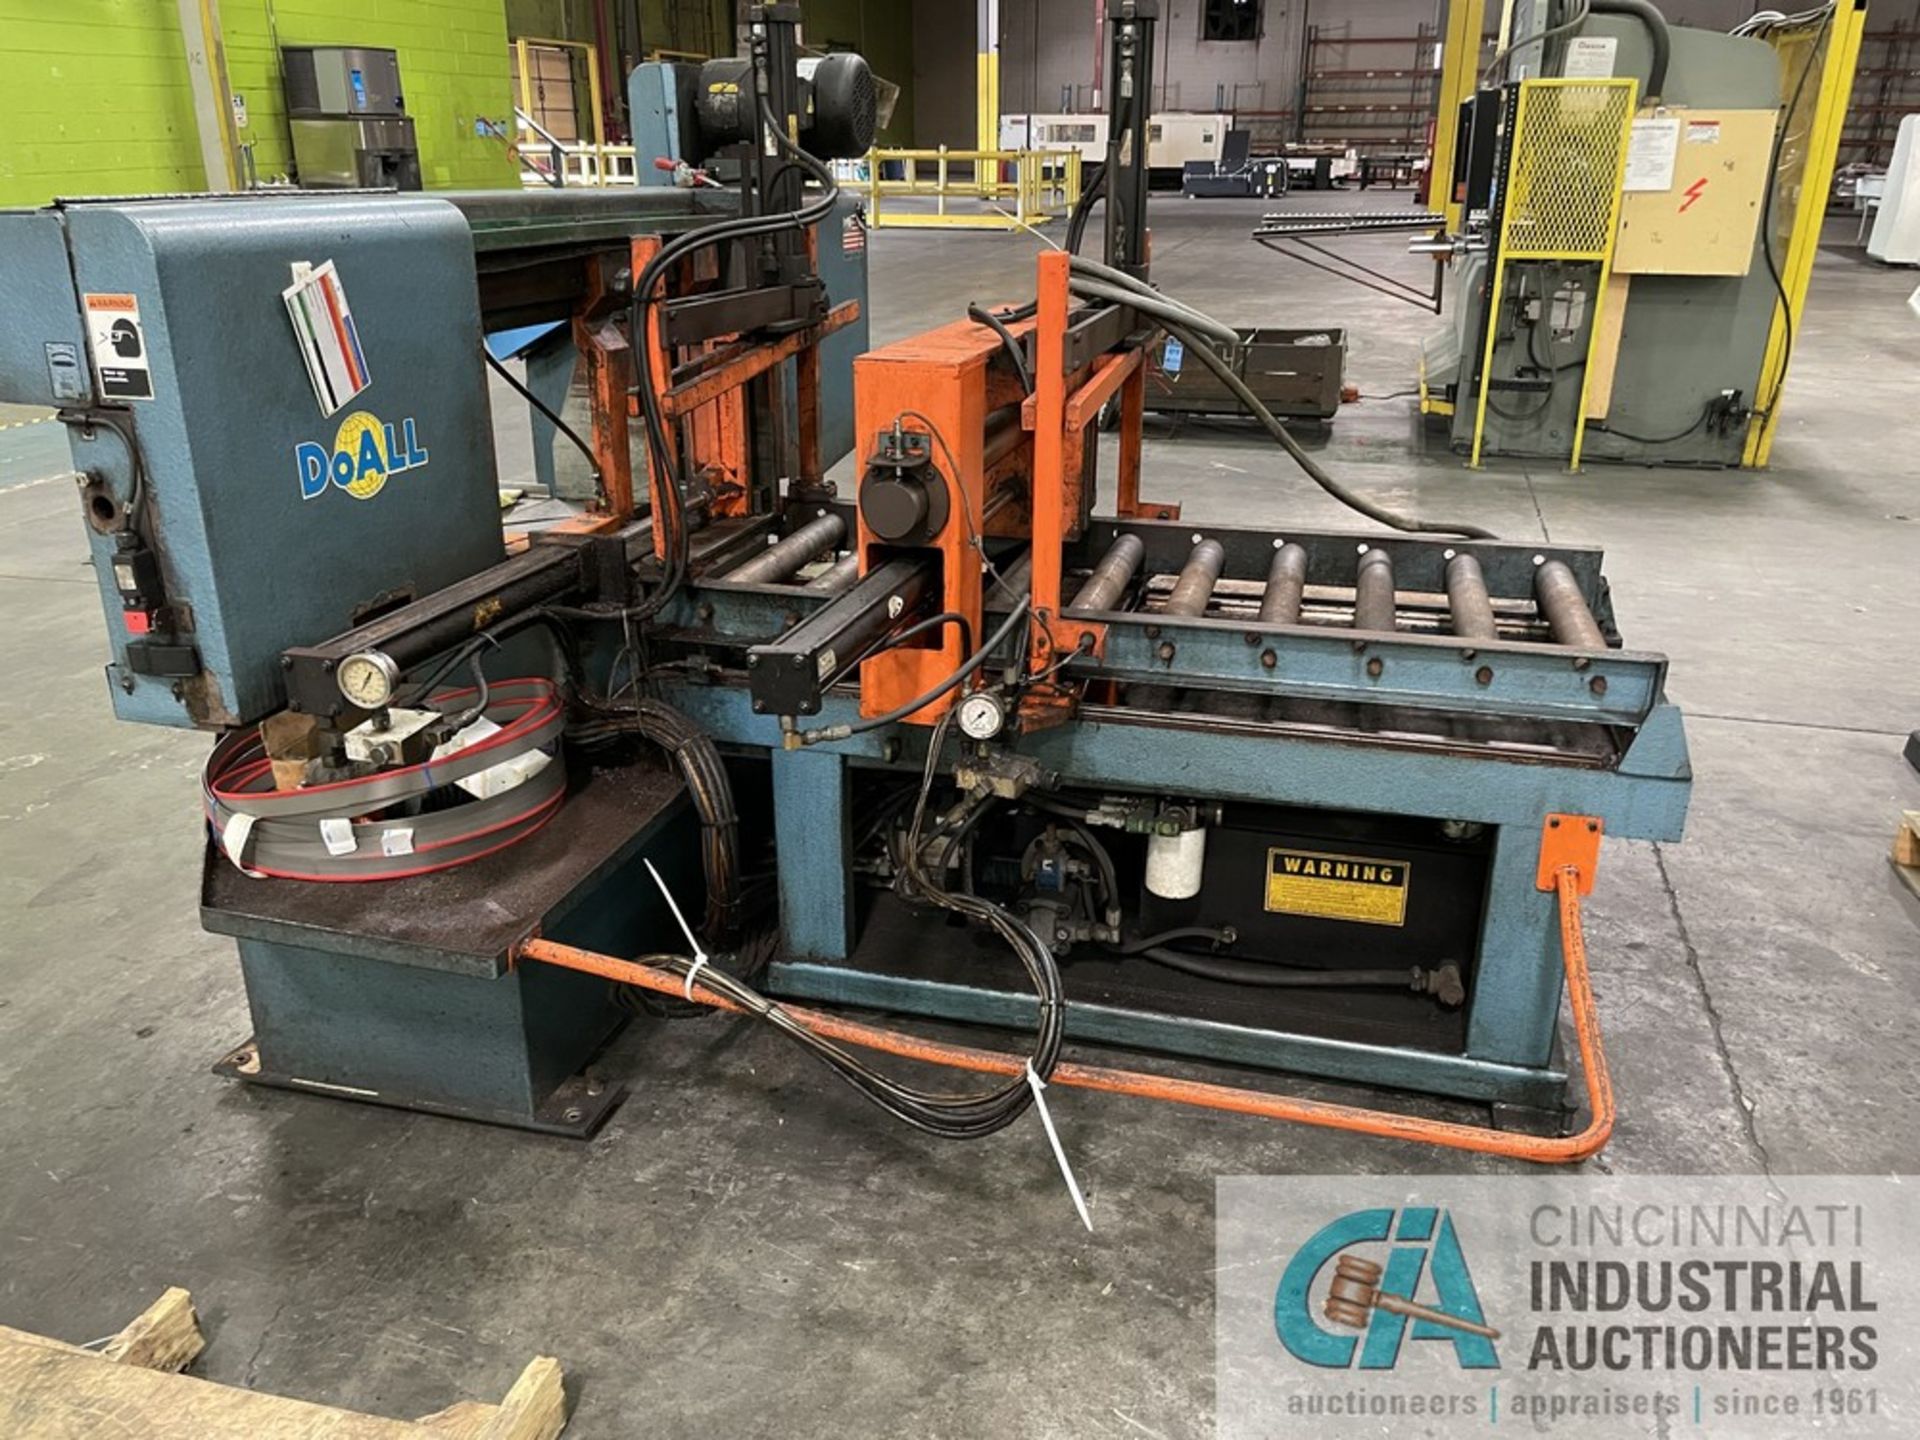 14 X 20 DOALL 500 SNC HORIZONTAL BAND SAW (2012) S/N 59212151, 60" POWER ROLLER CONVEYOR AND POWER - Image 8 of 9